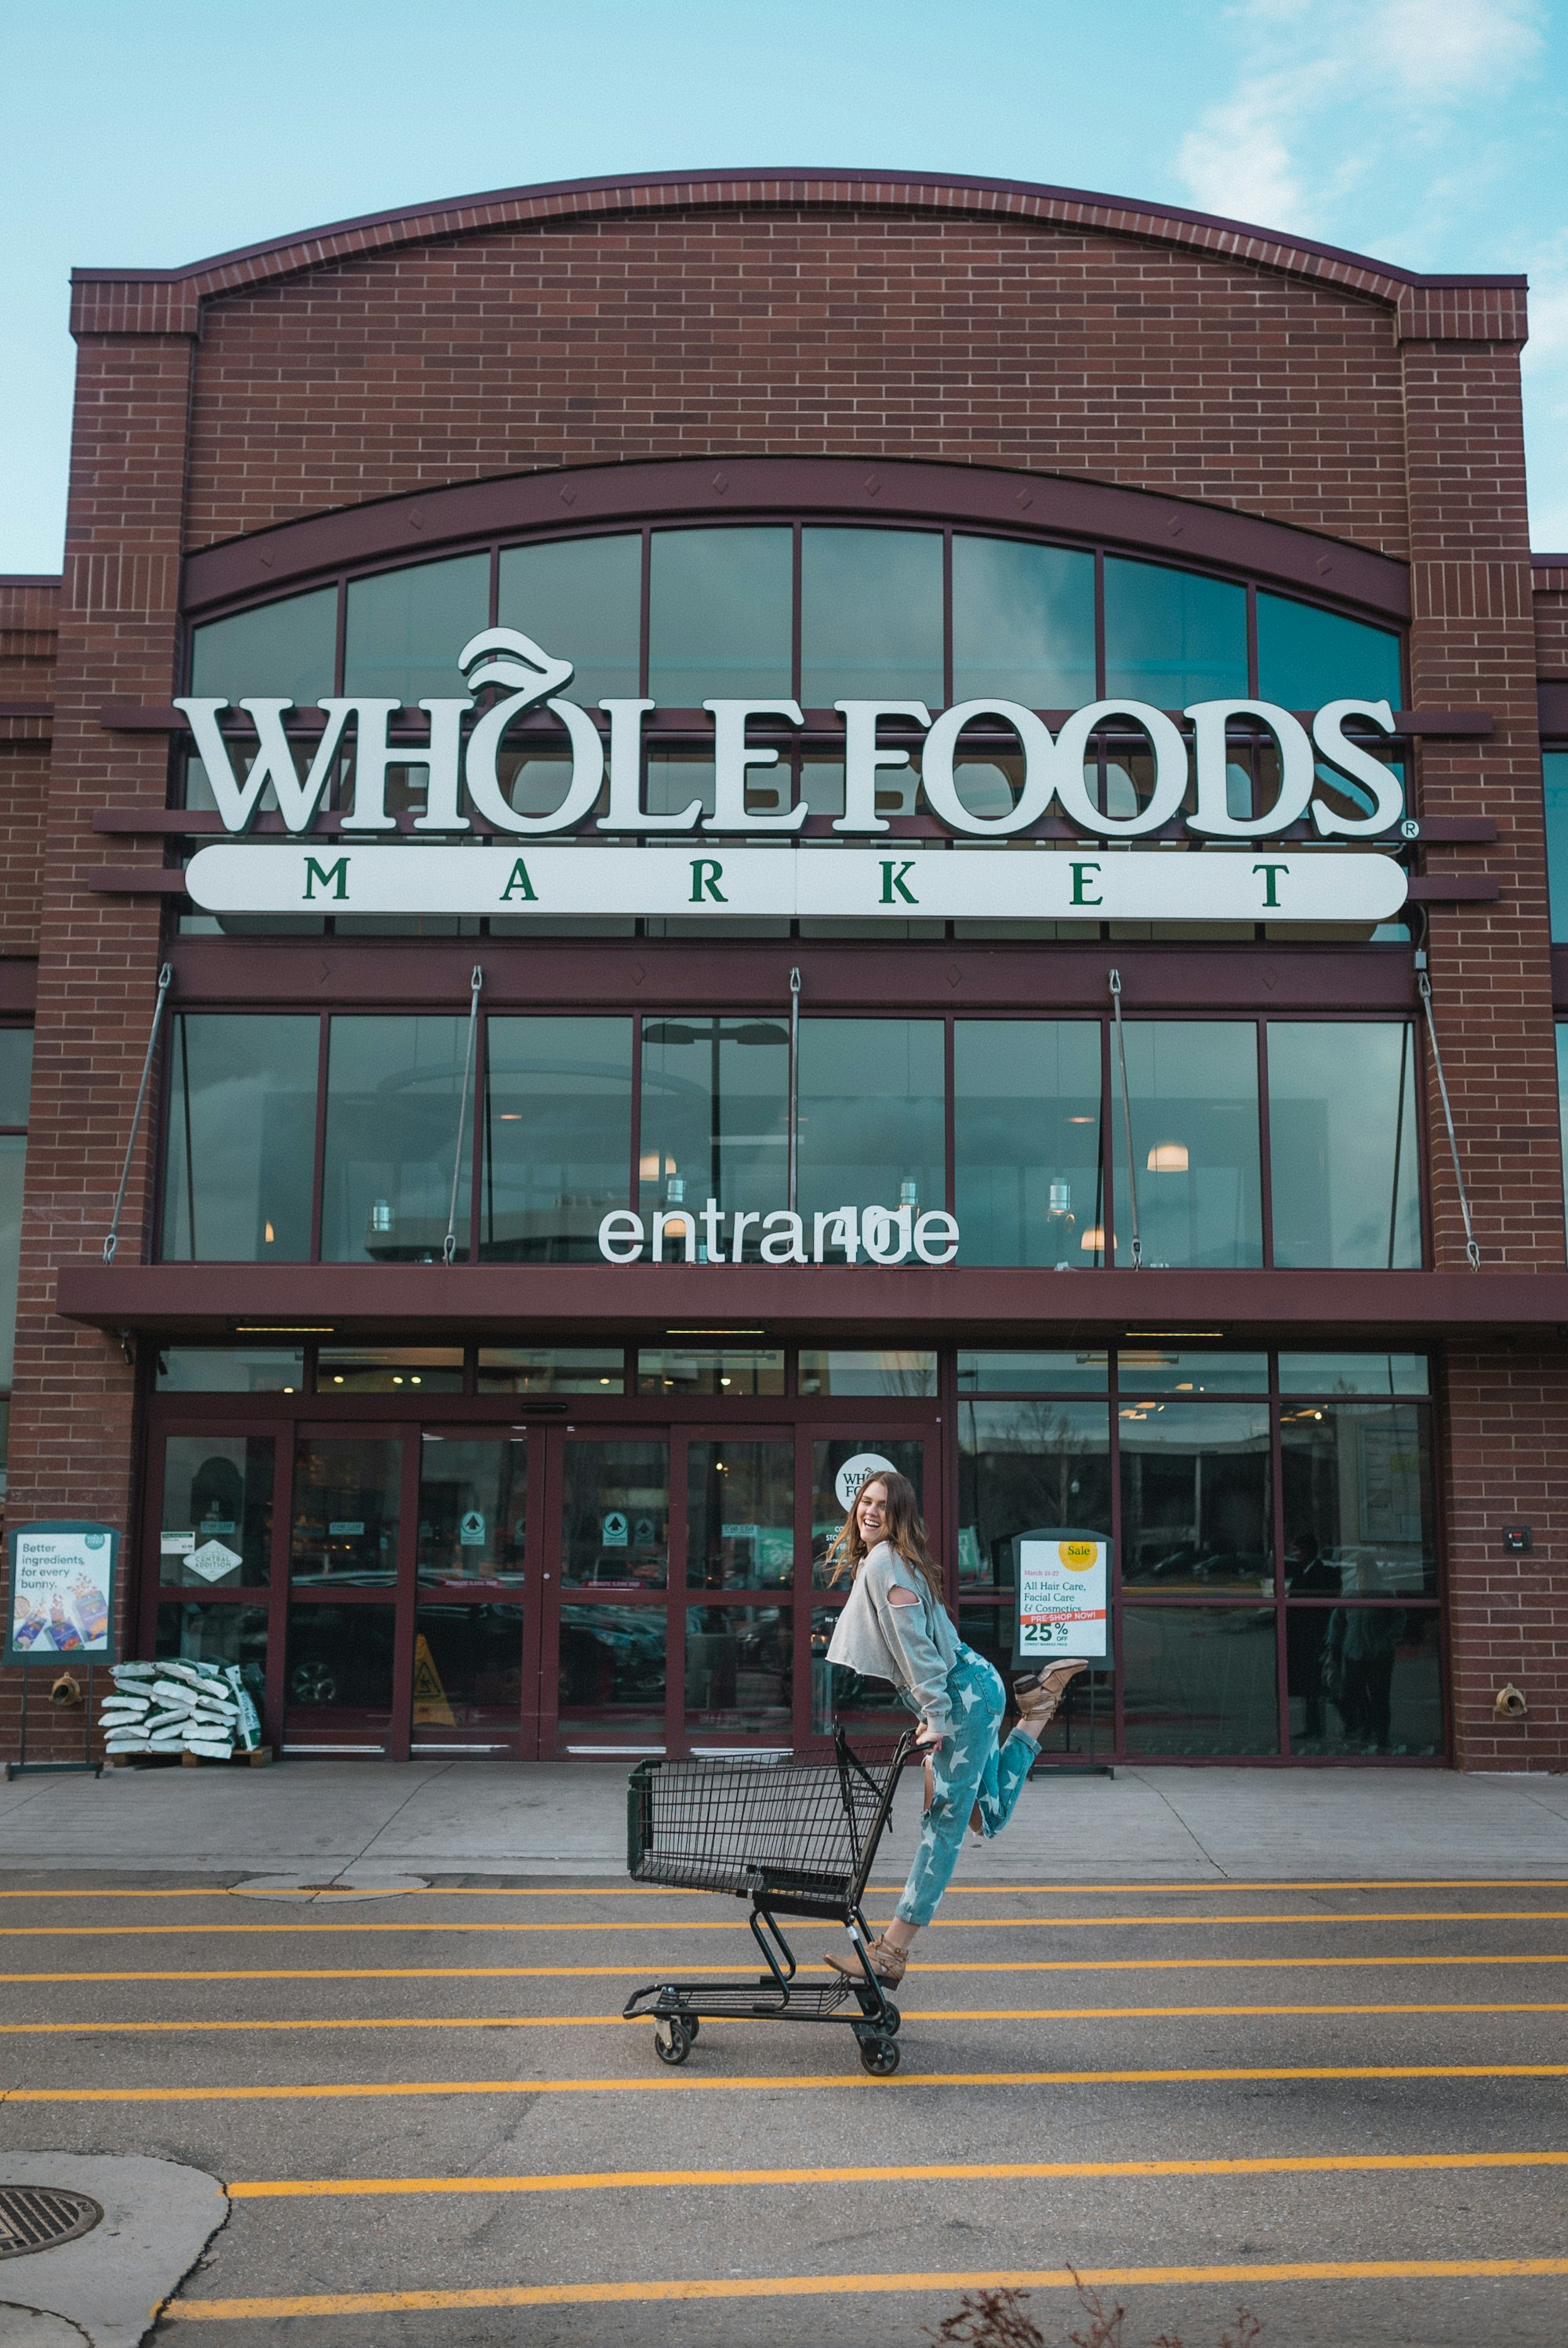 🥩Whole Foods Lawsuit Claims Beef Sold at Stores Breaks Promise of 'No Antibiotics, Ever'